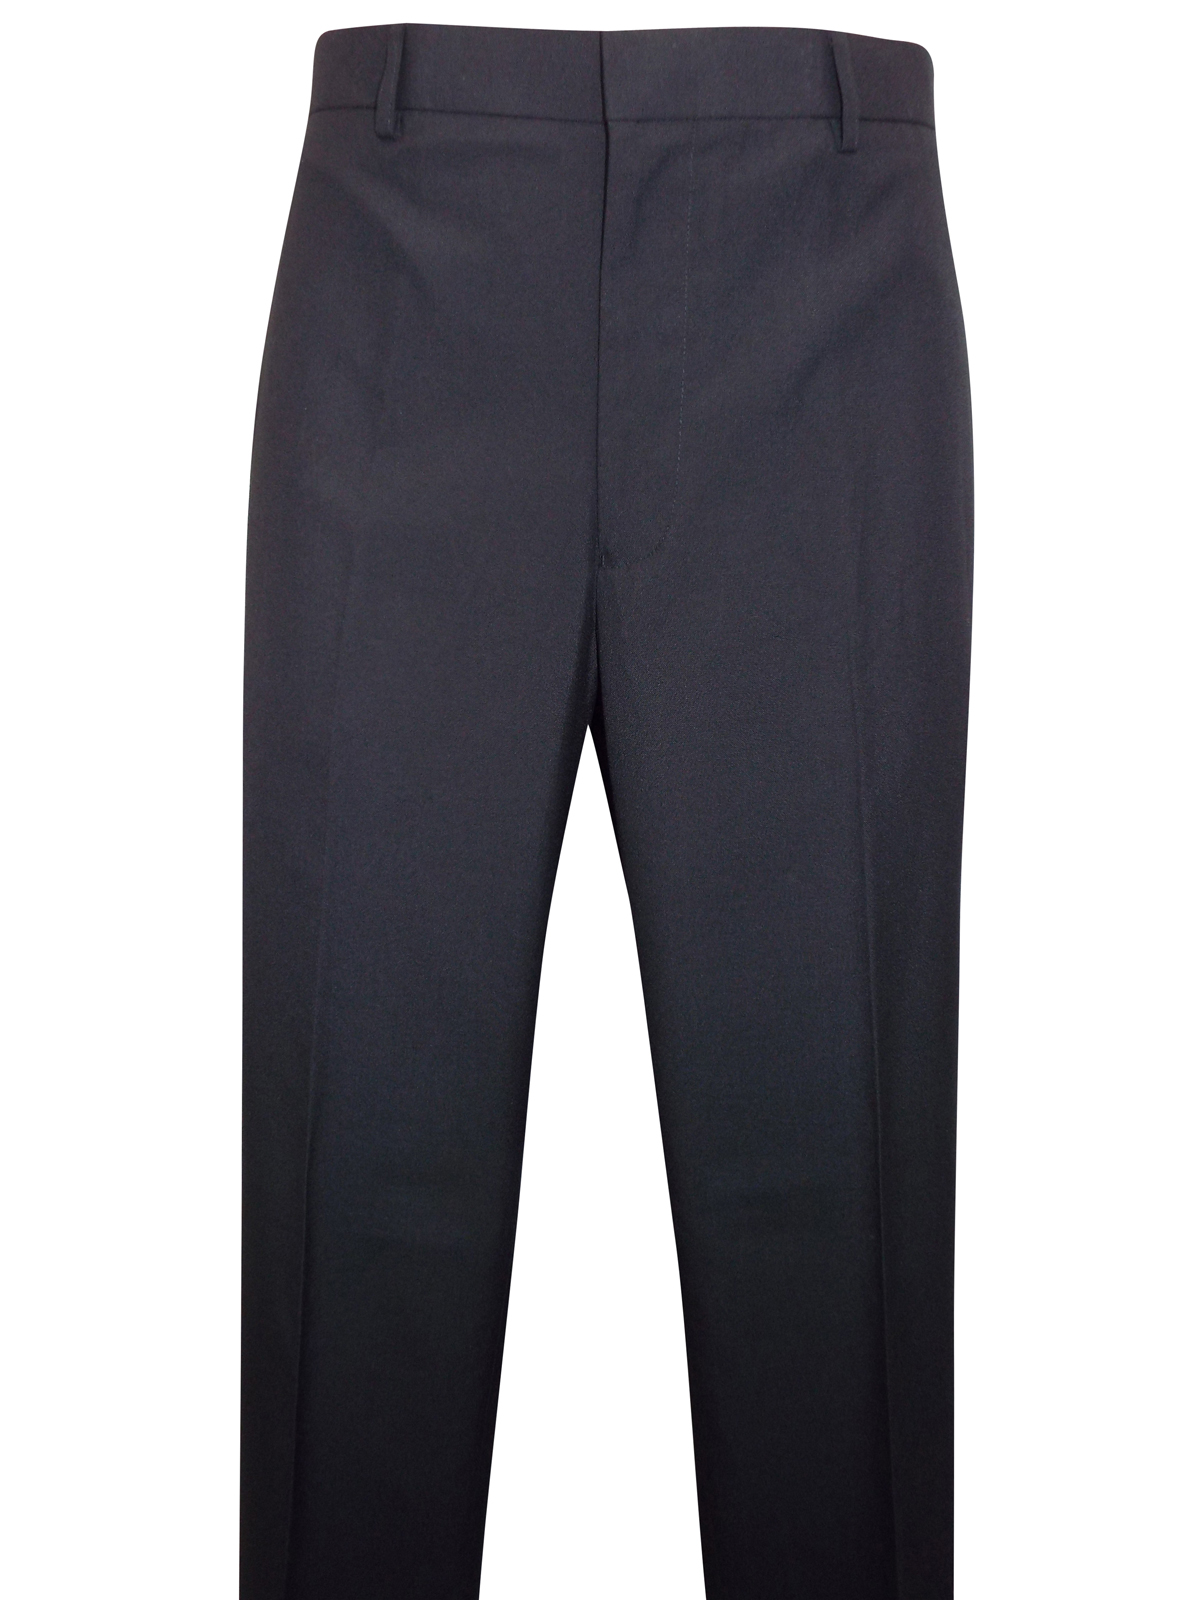 Marks and Spencer - - M&5 BLACK Satin Piping Tuxedo Trousers - Waist ...